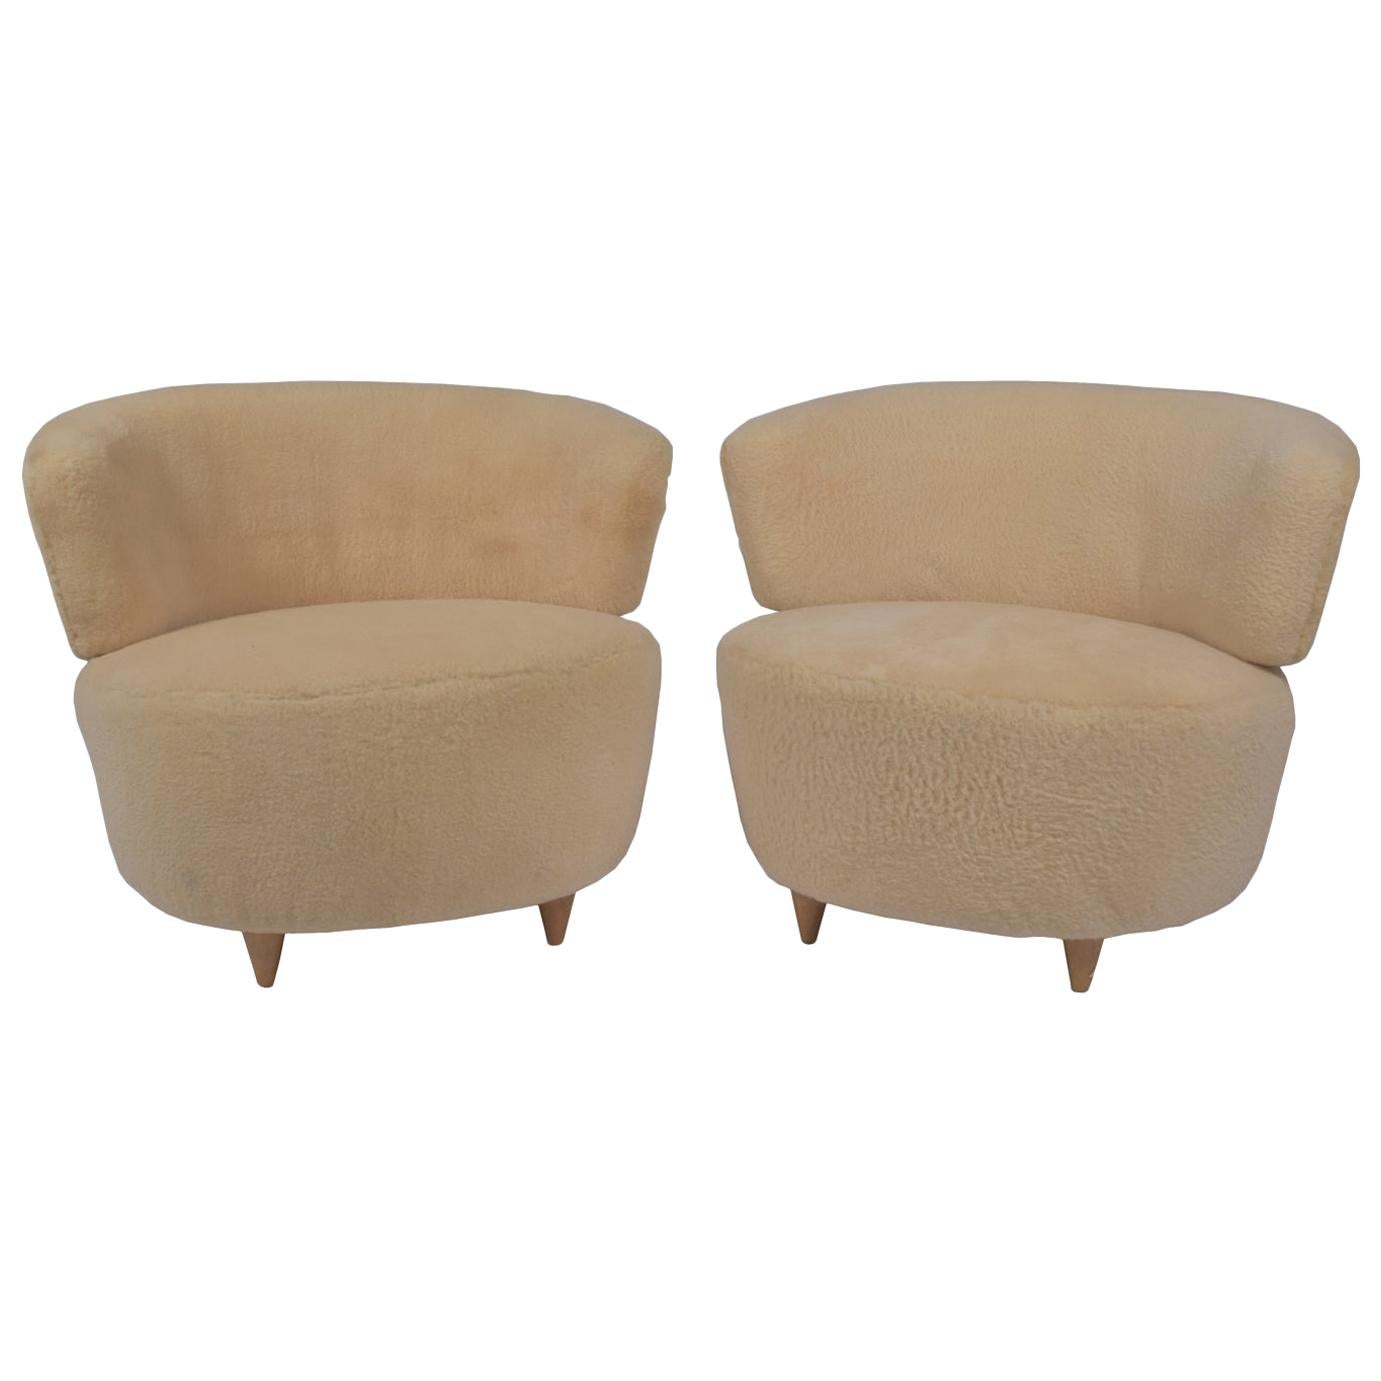 Gilbert Rohde Pair of Lounge Chairs Herman Miller, 1940